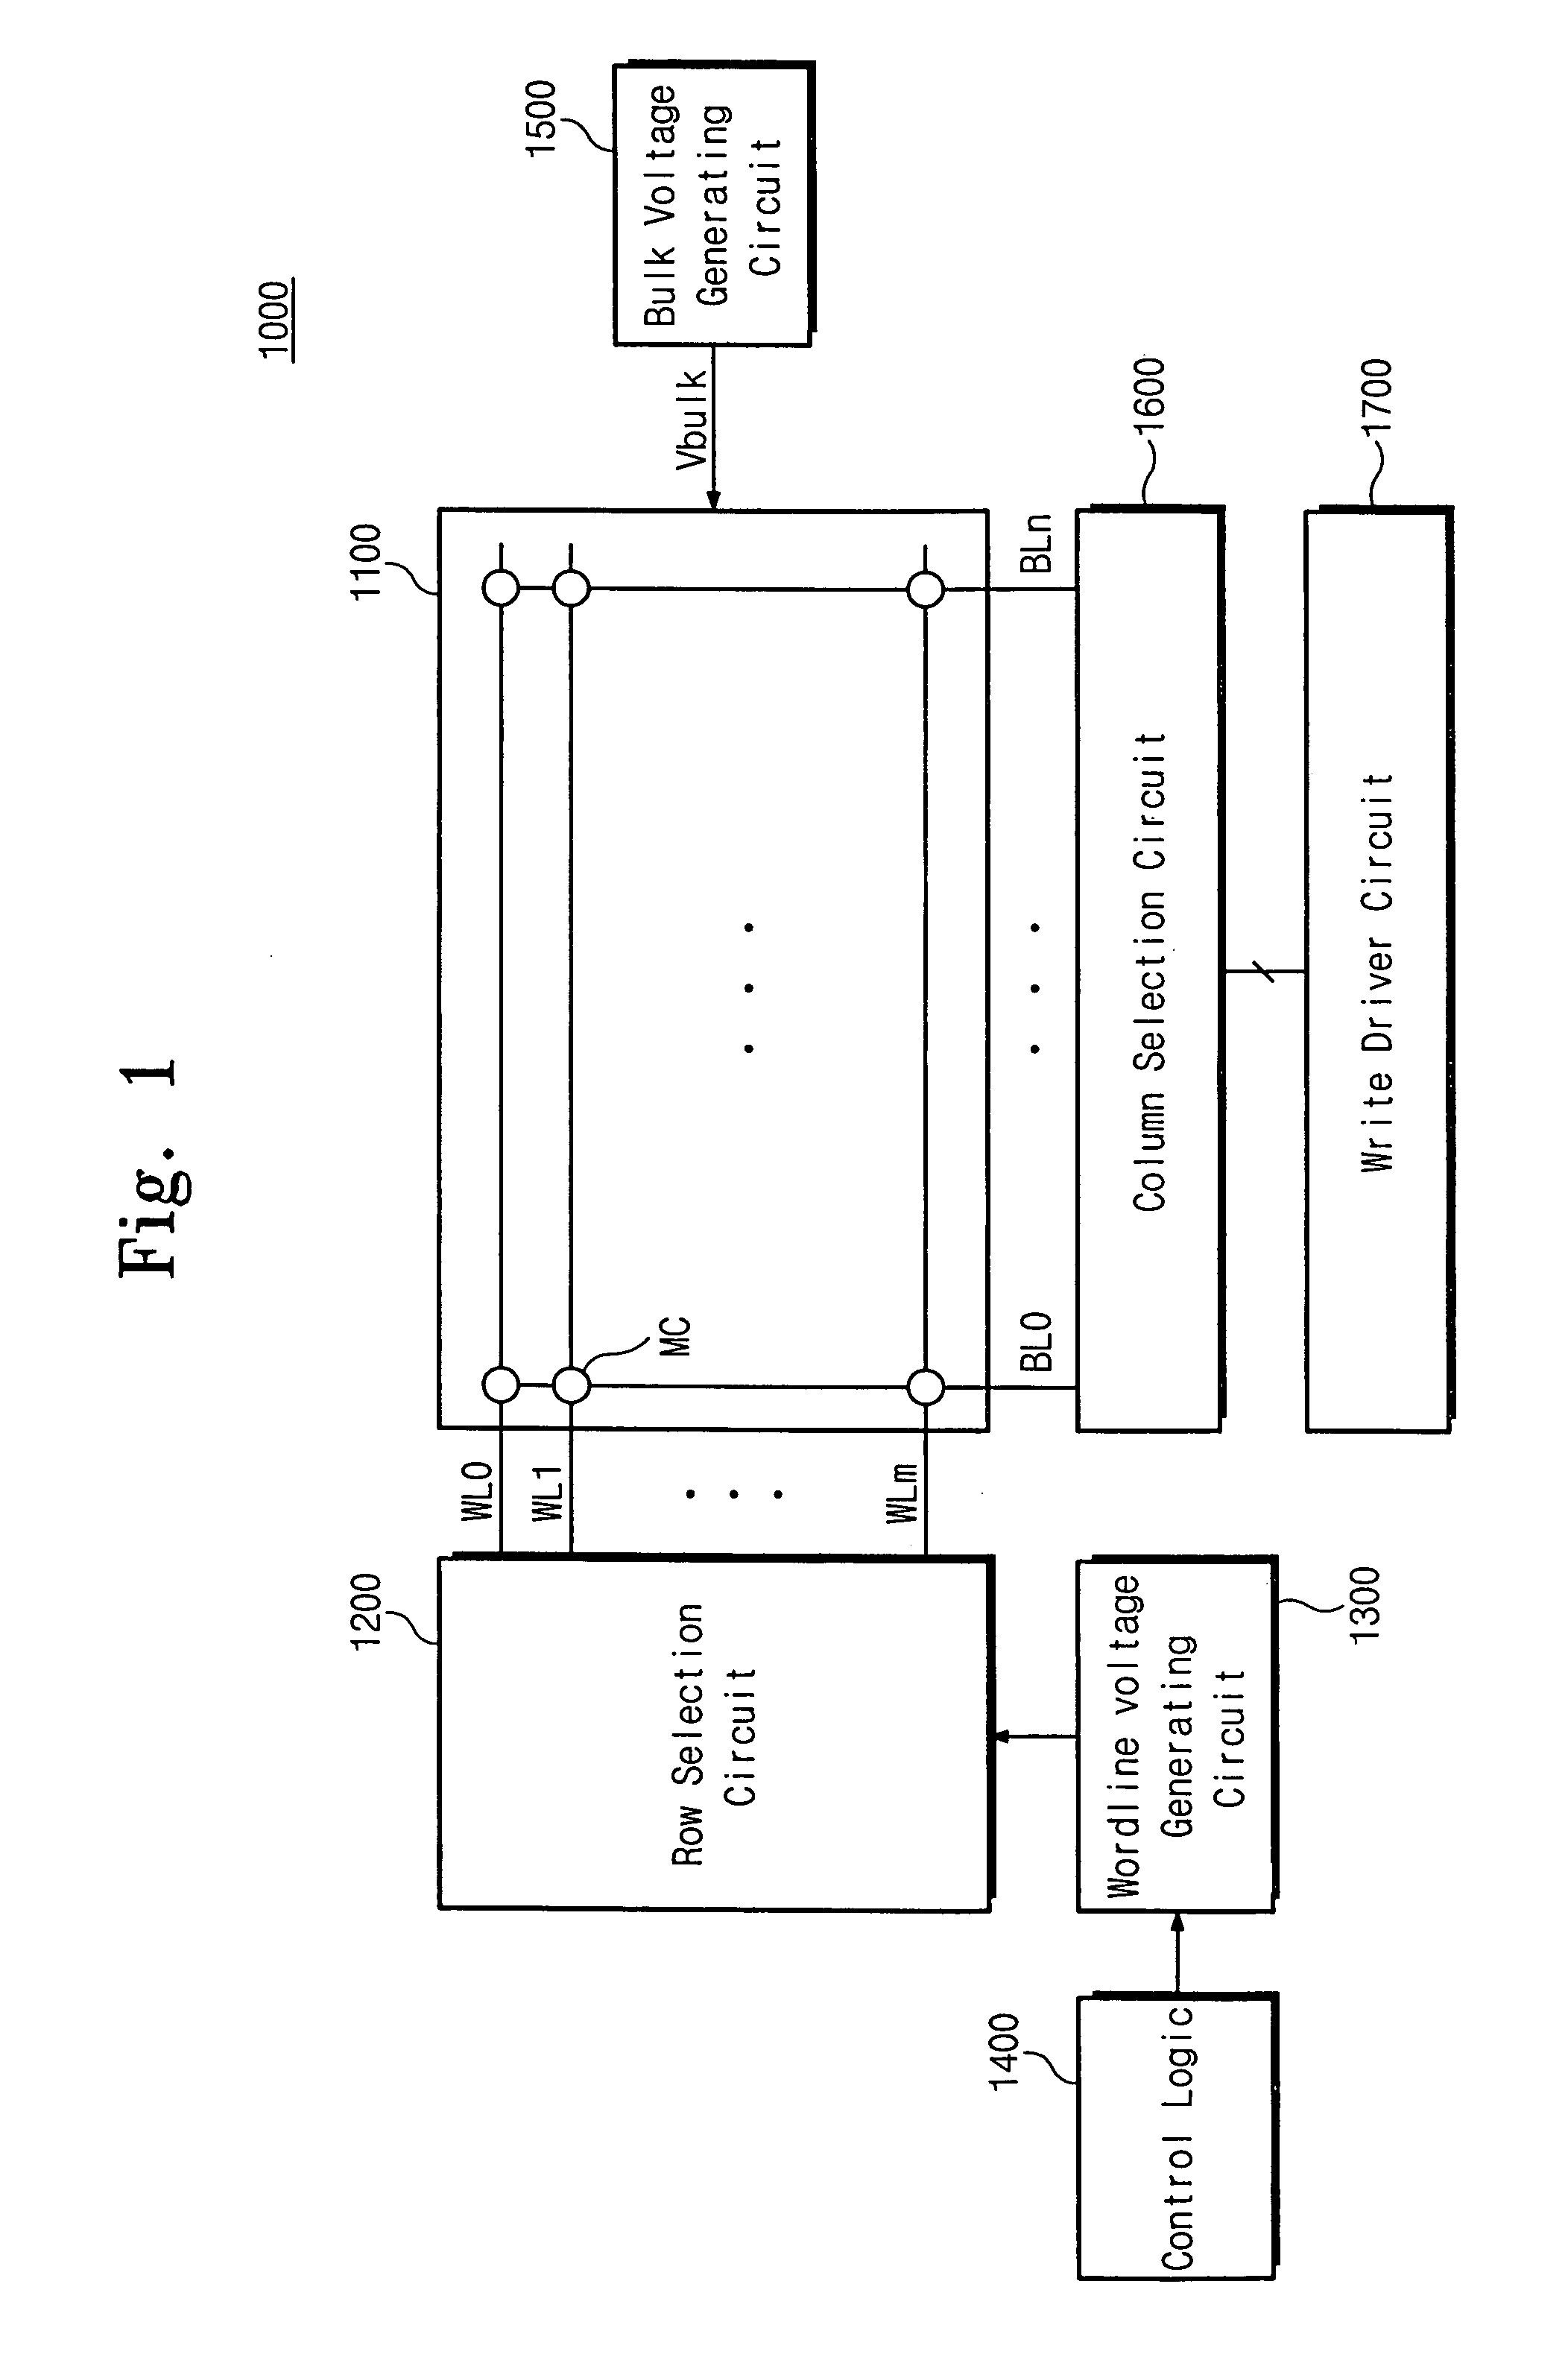 Flash memory device with reduced erase time